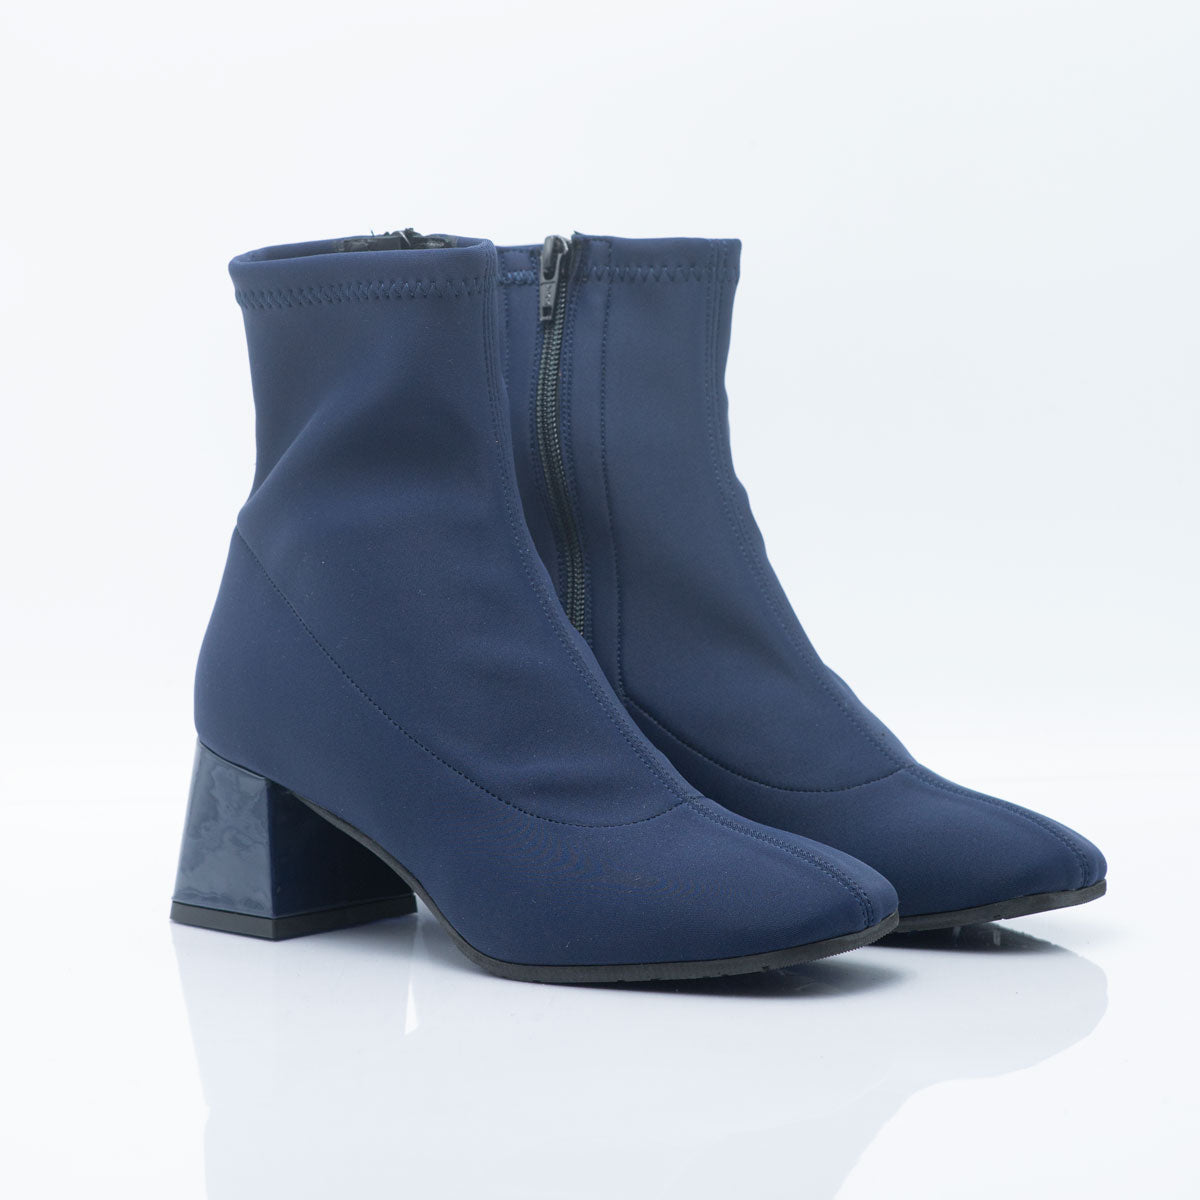 Figini - Blue fabric Ankle Boot with a laser-cut design.